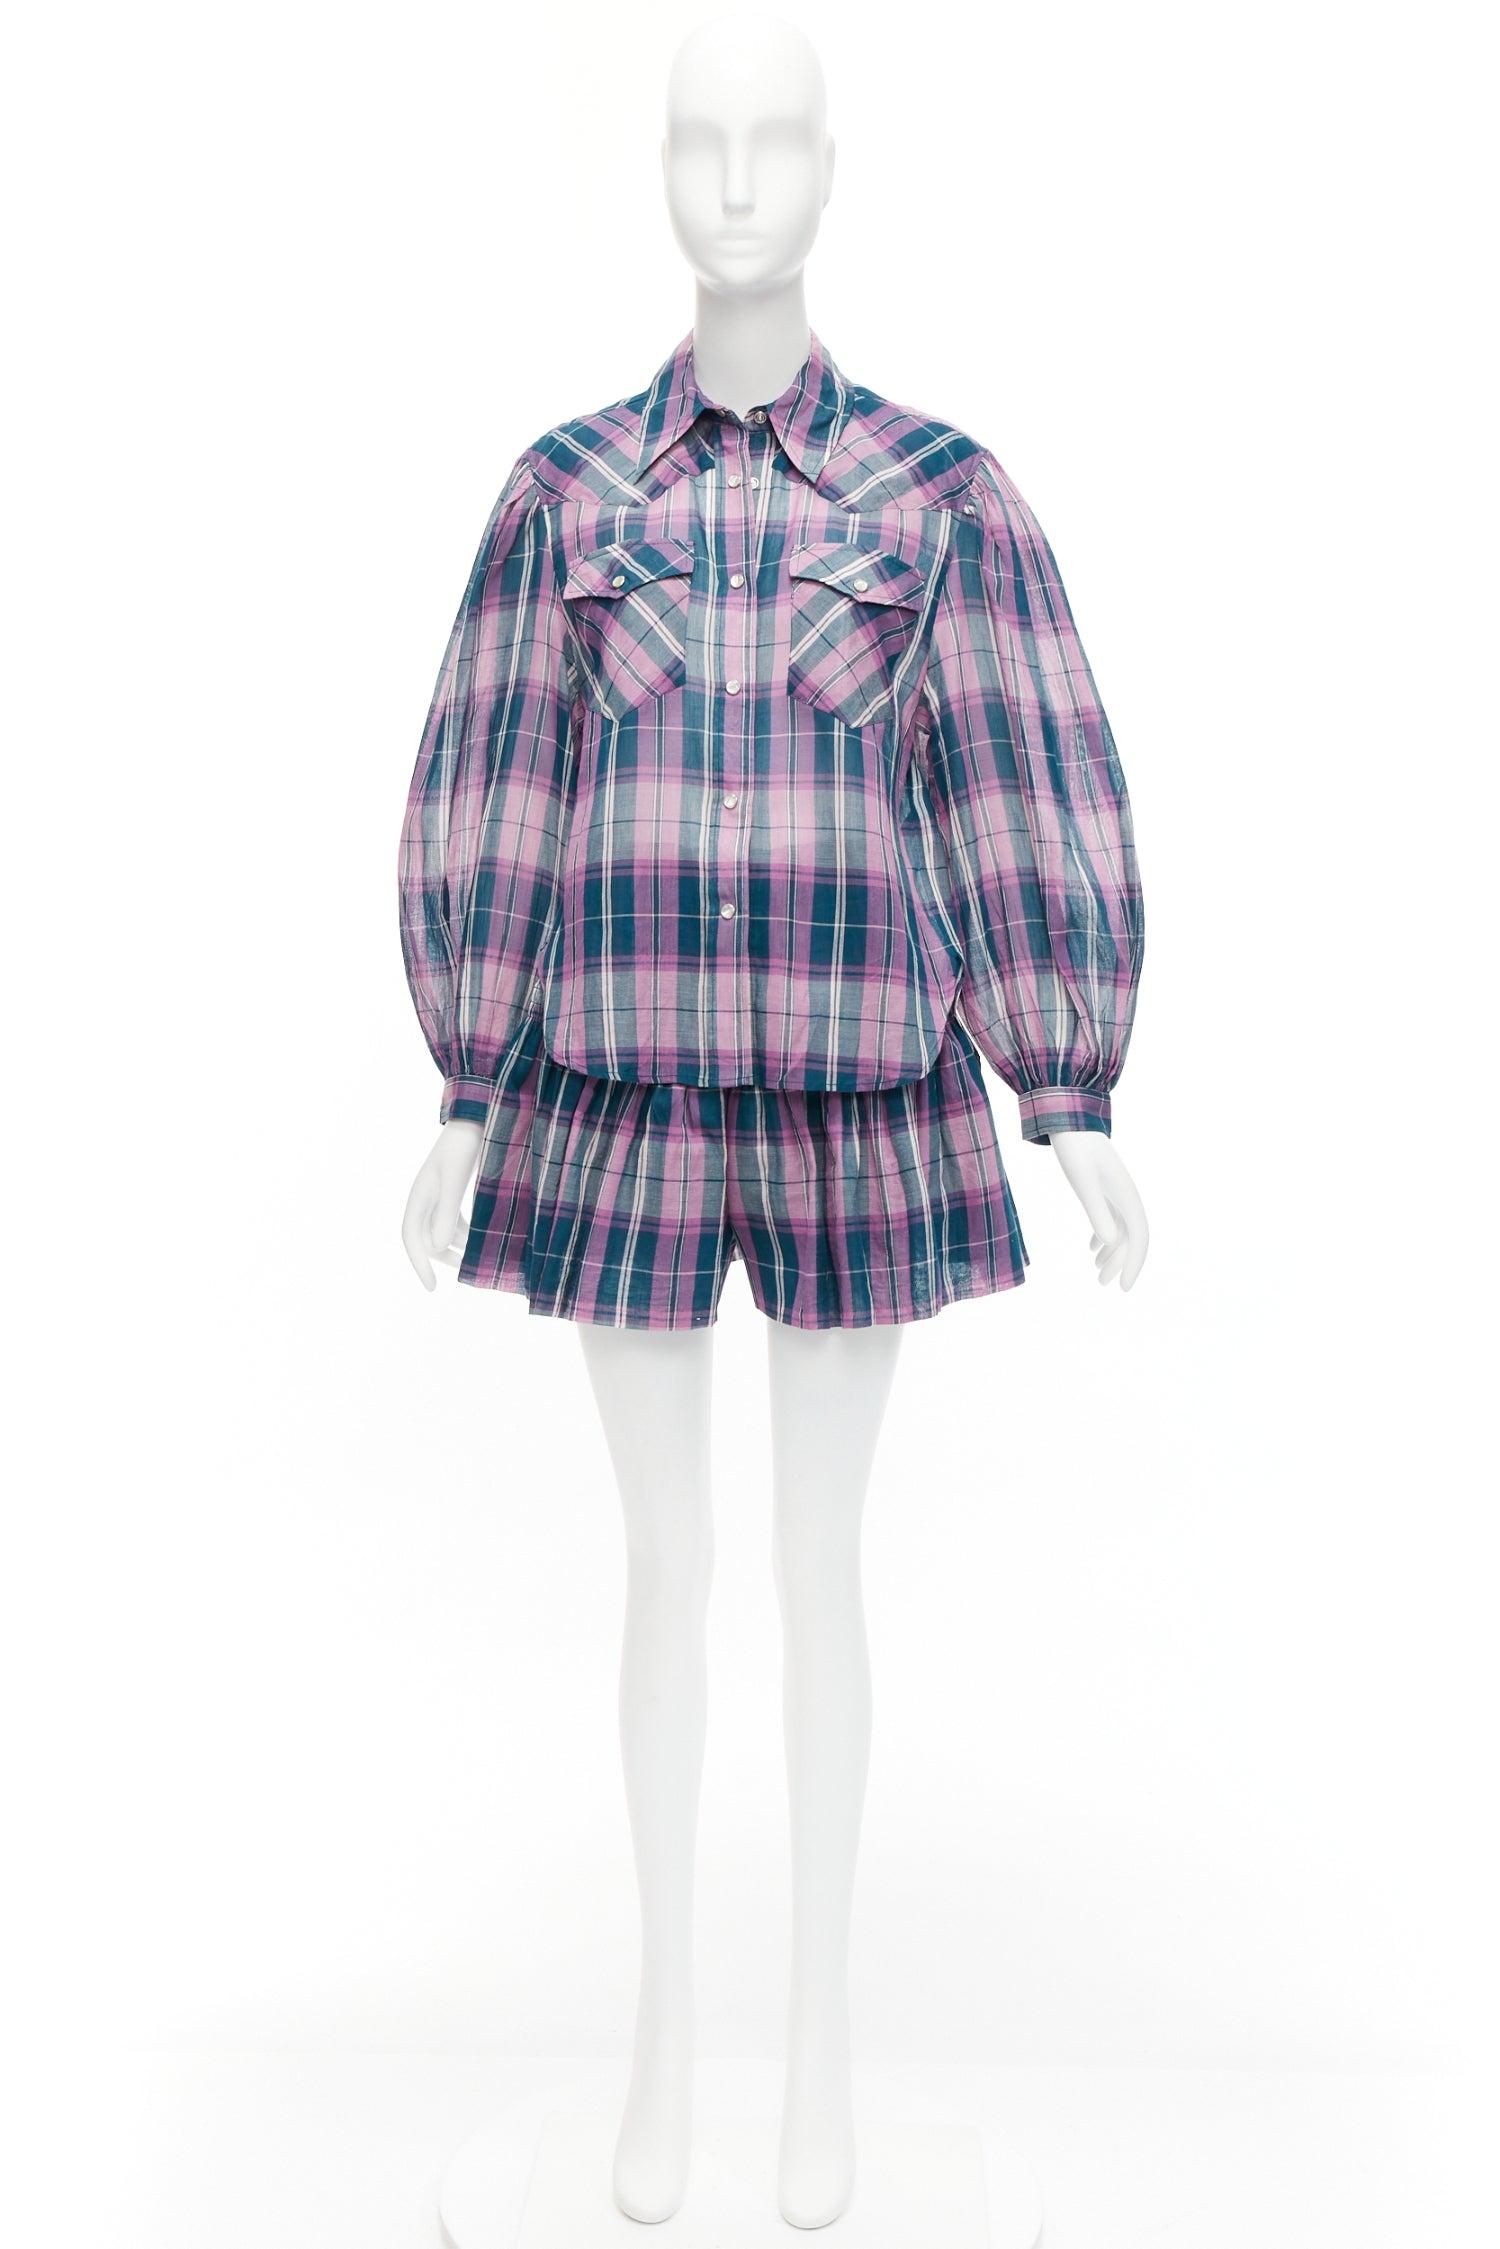 ISABEL MARANT ETOILE Bethany purple cotton check top FR34 XS shorts FR36 S set For Sale 8